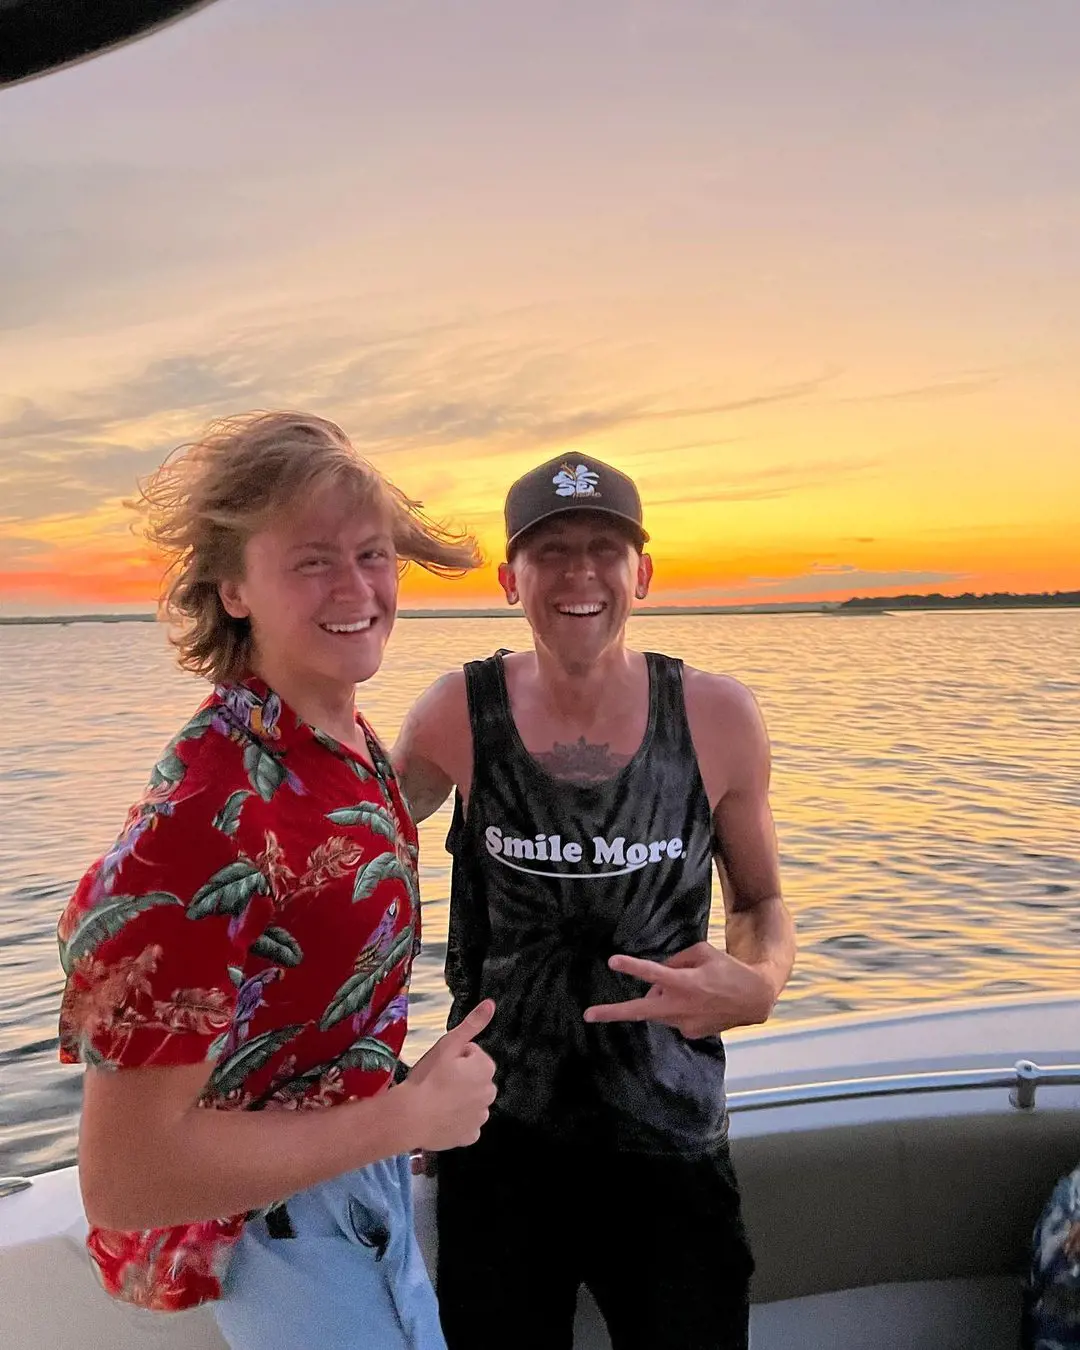 Roman having a great time with his eldest son Noah during sunset at the sea. 